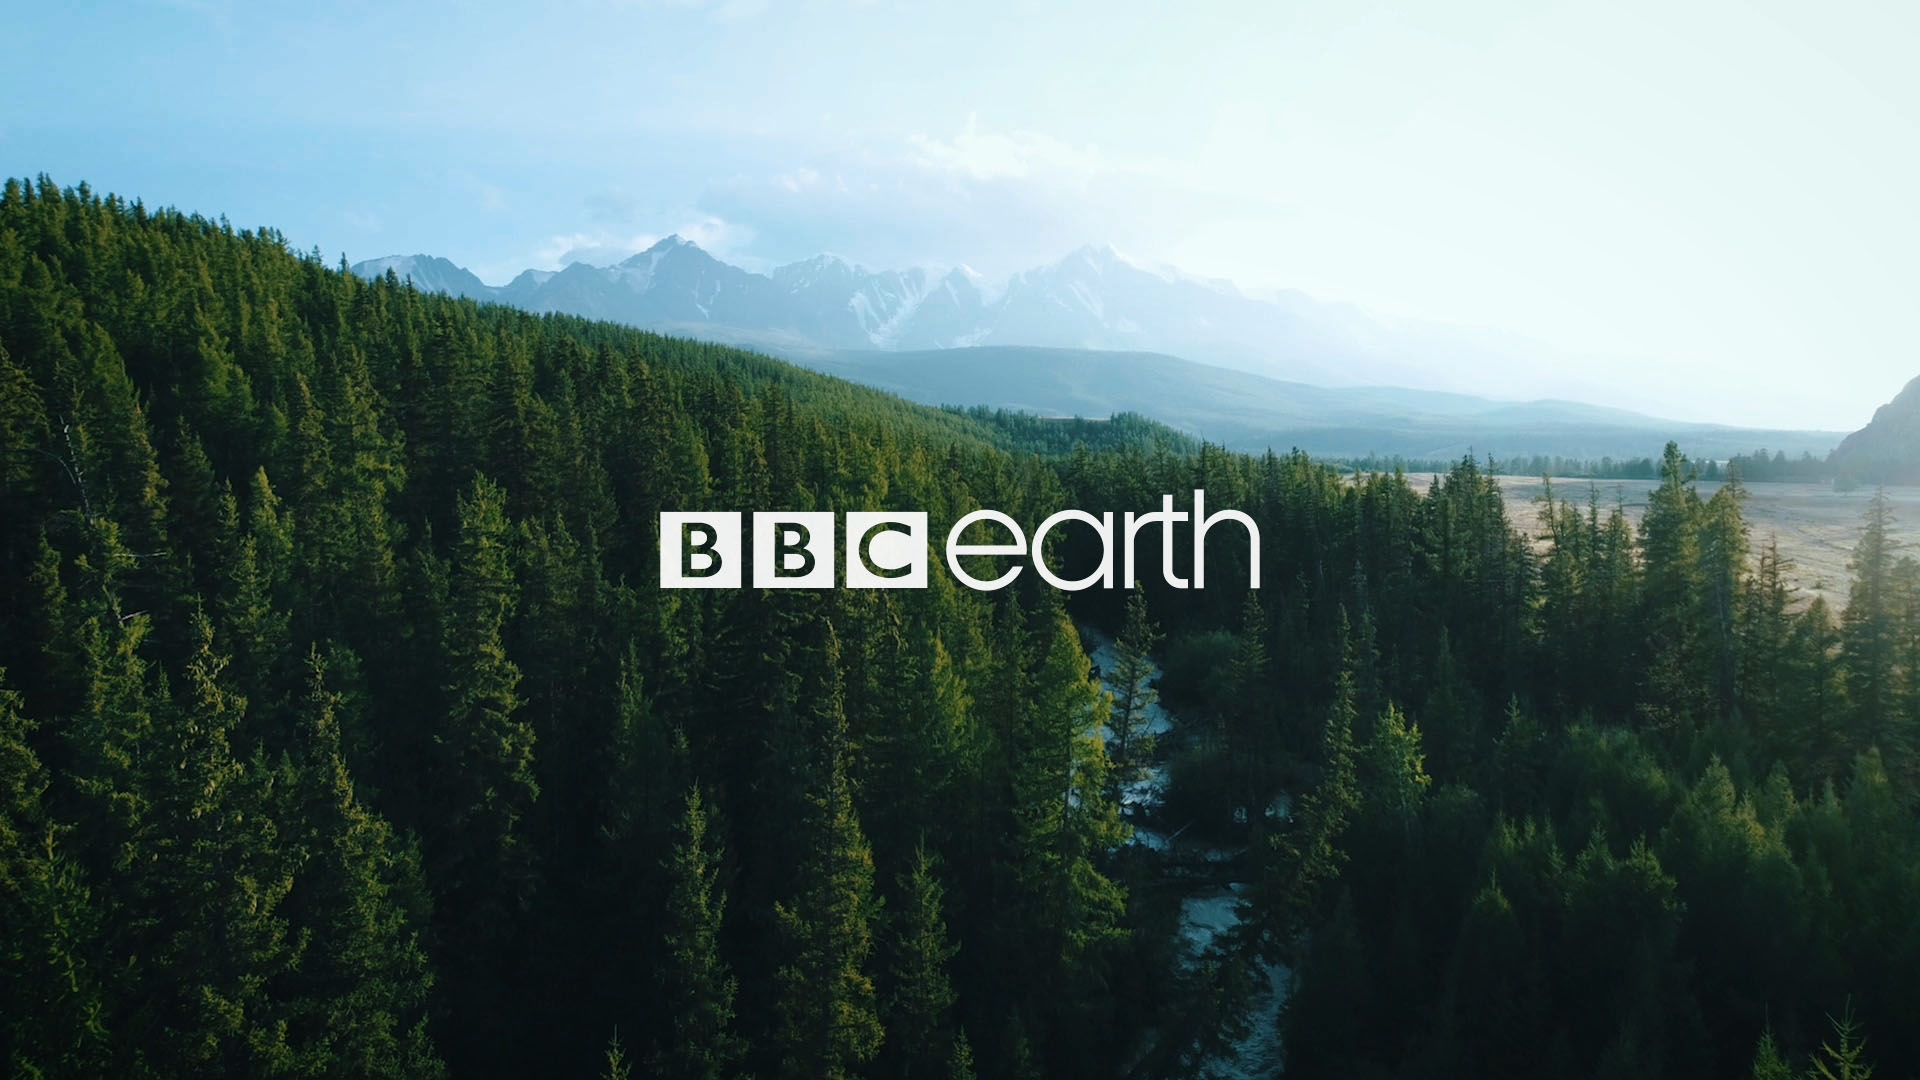 https://www.waproductions.com/images/work/examples/bbc-earth-01.jpg